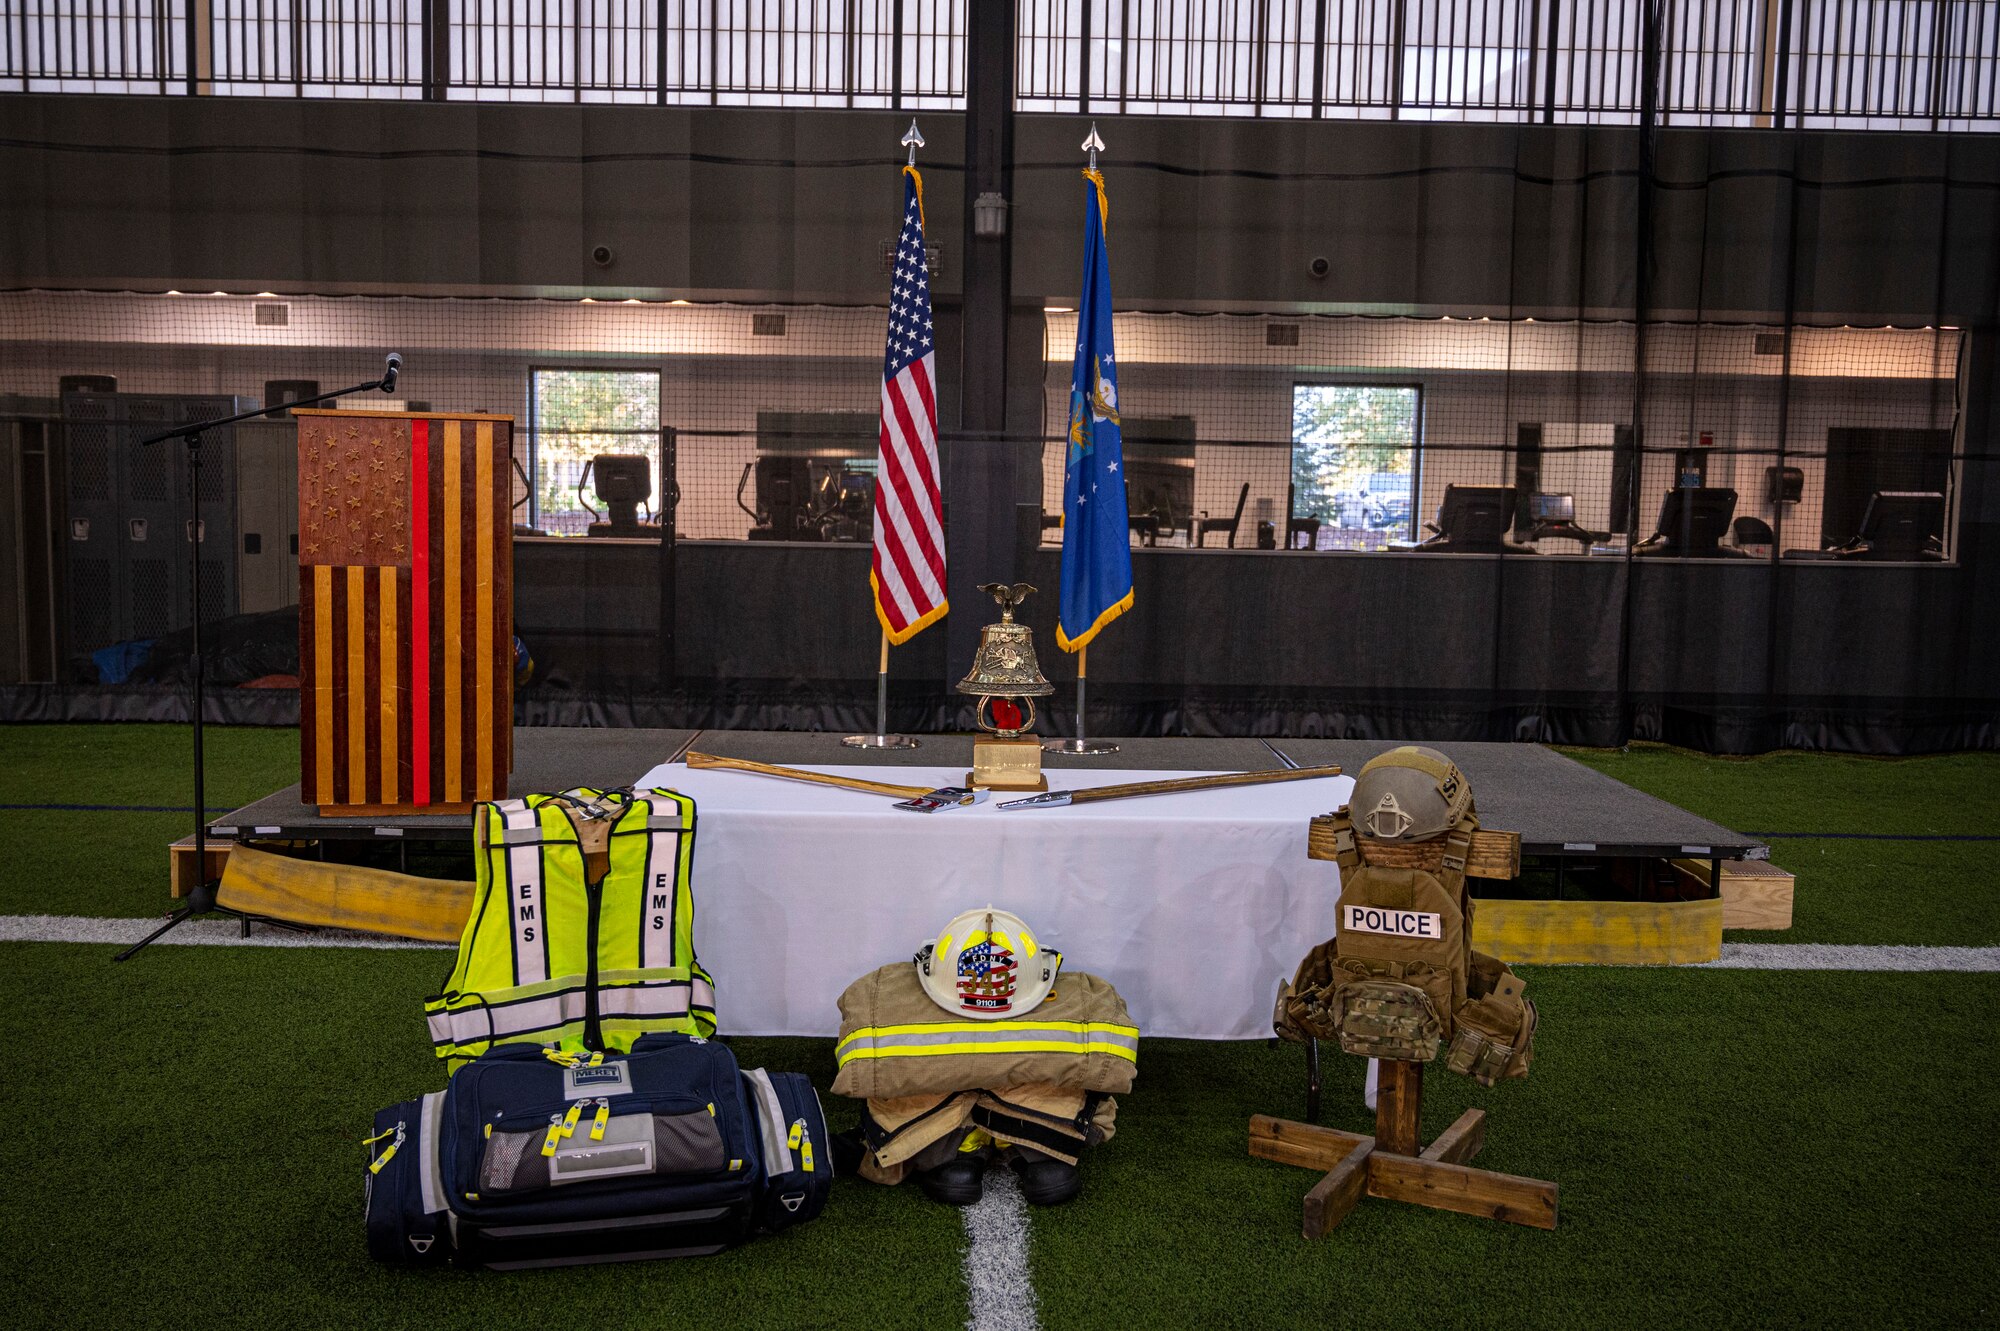 Equipment of all three types of first responders during the September 11th Remembrance Ceremony is displayed